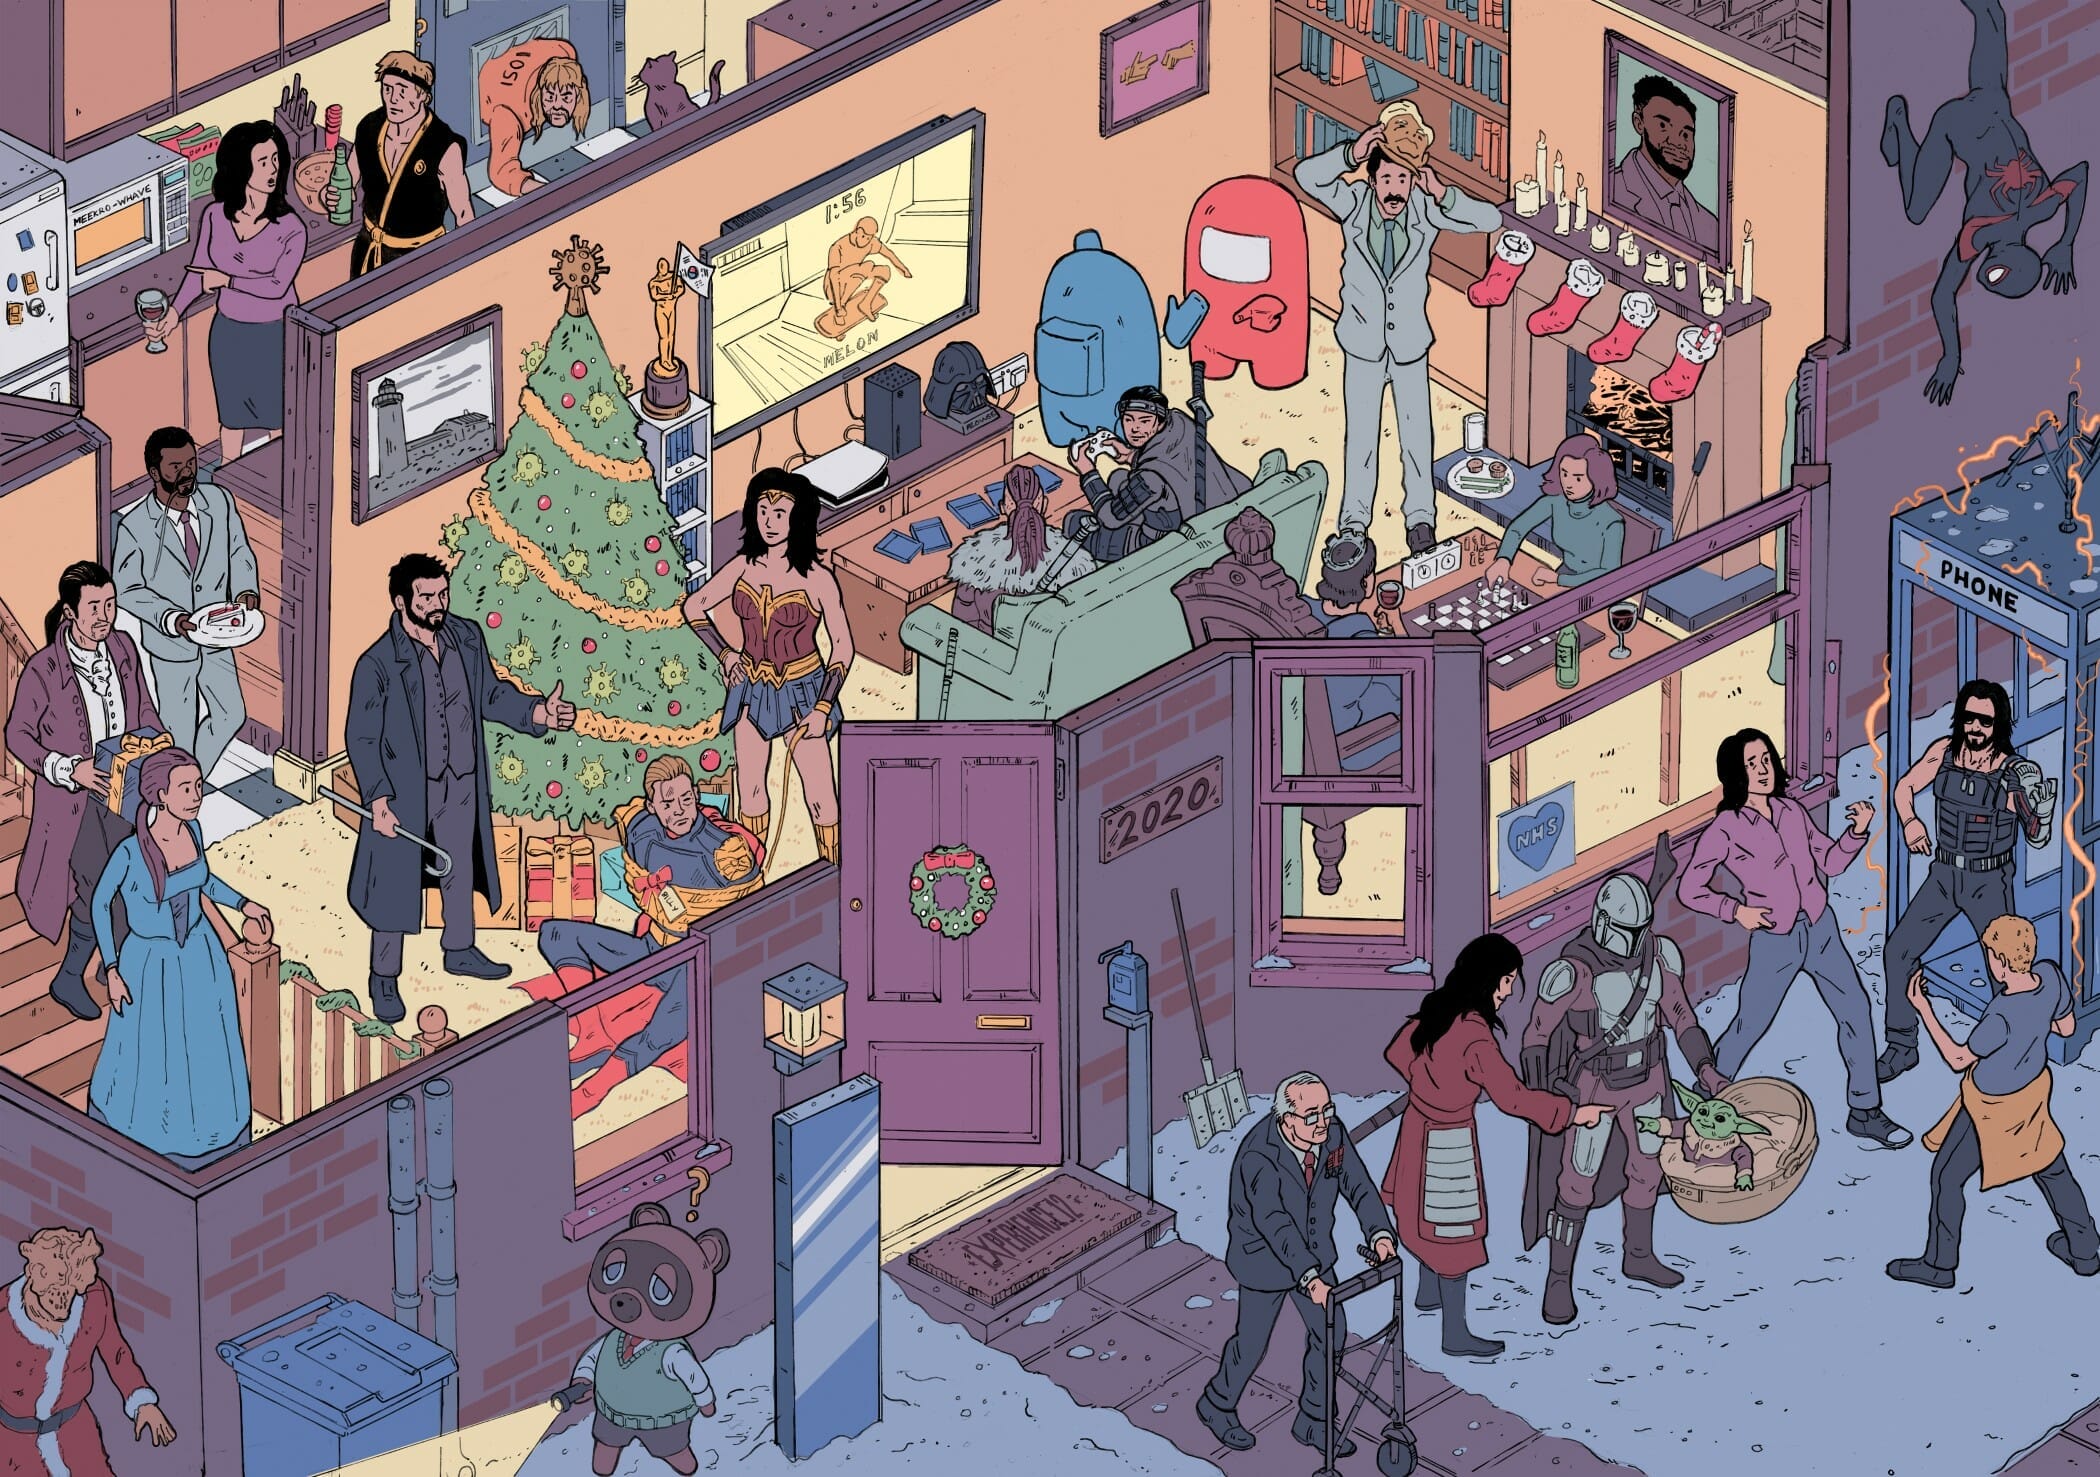 Pop culture challenge by Laurie Greasley